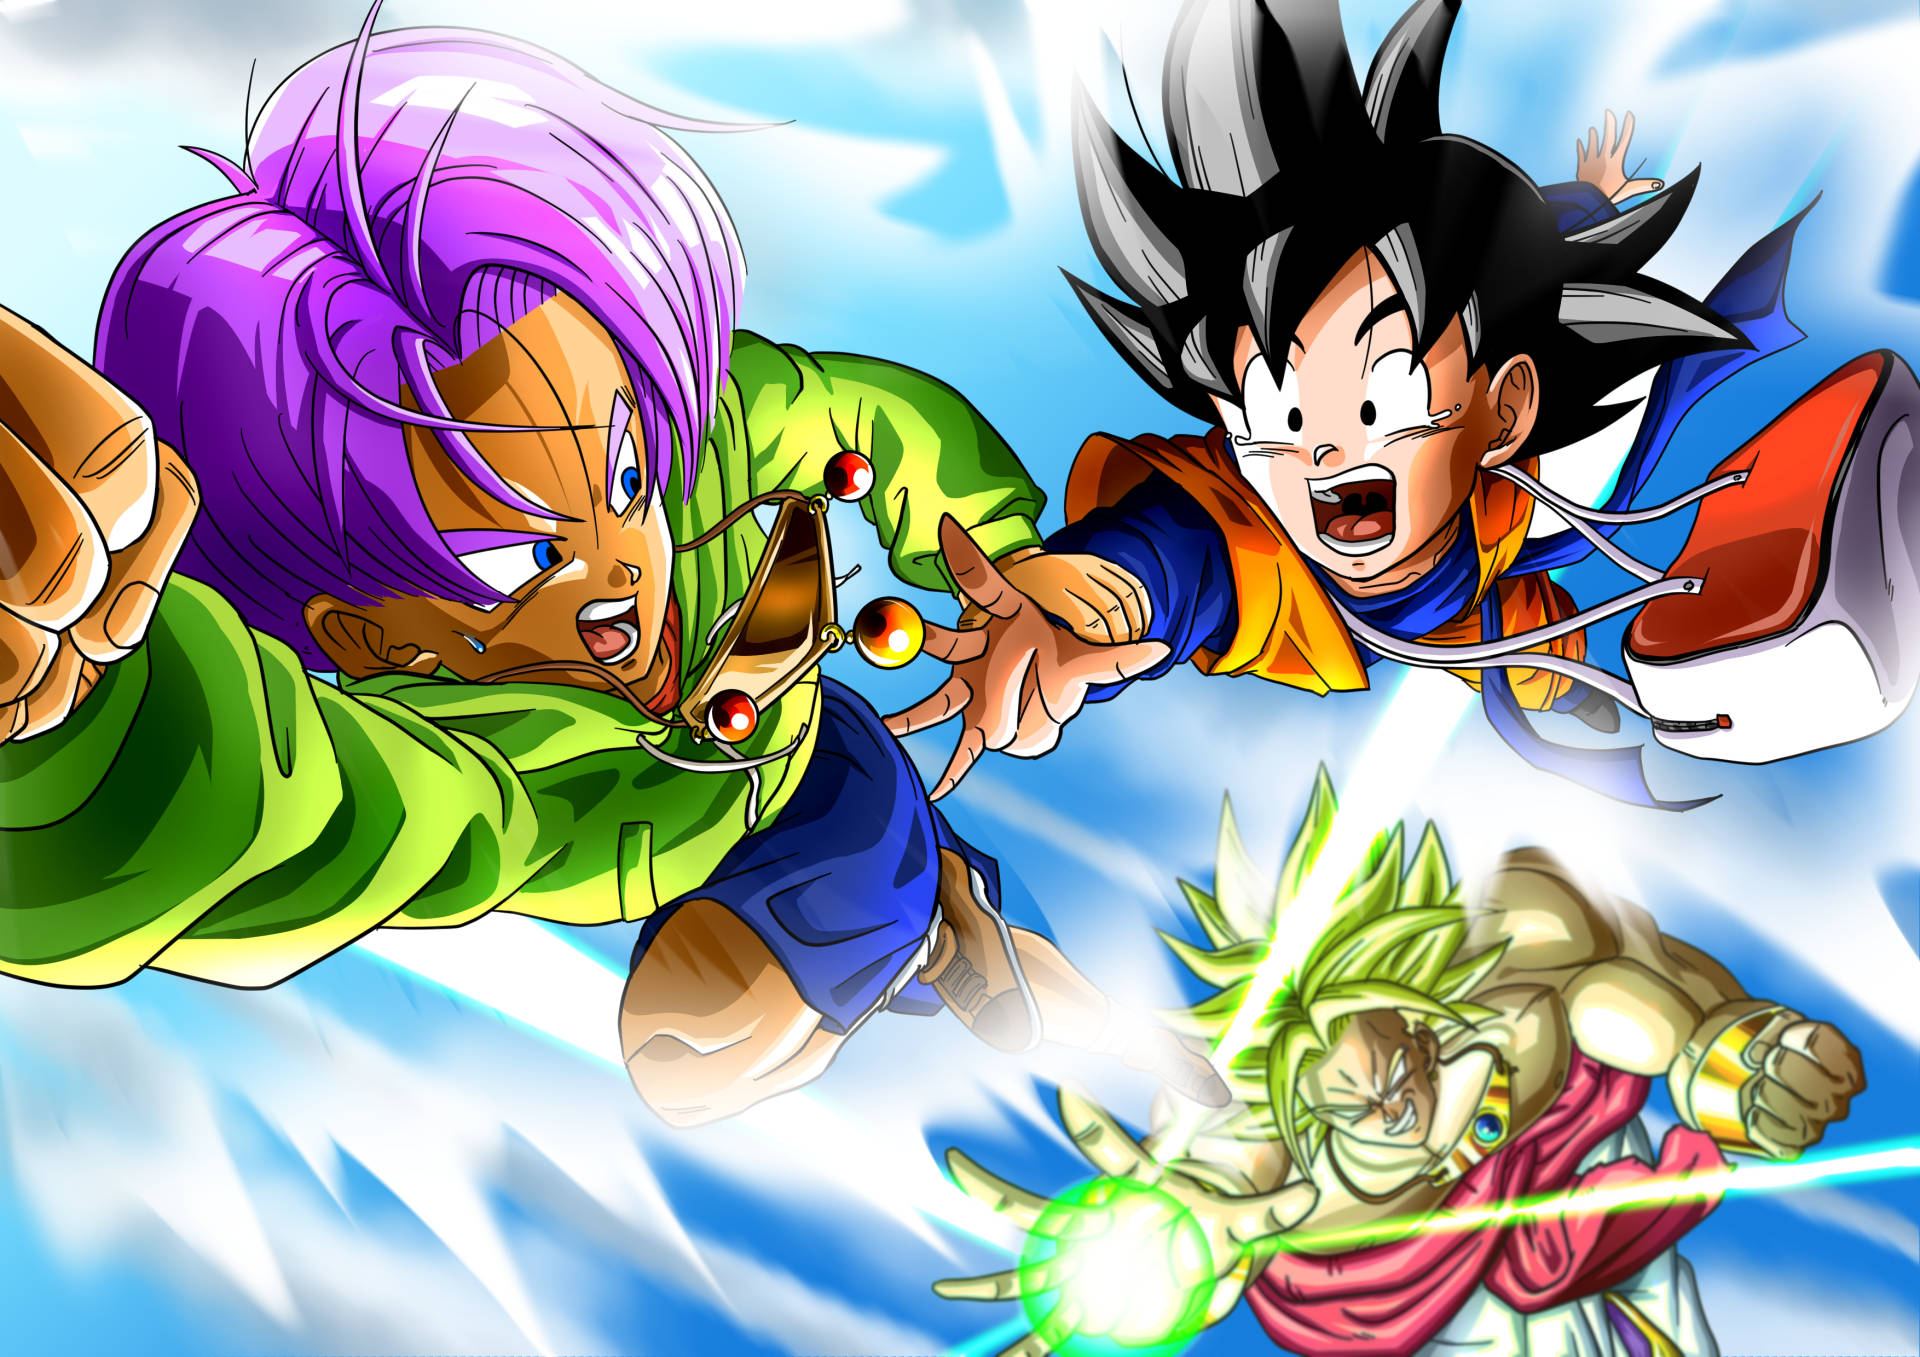 Goten With Trunks On Air